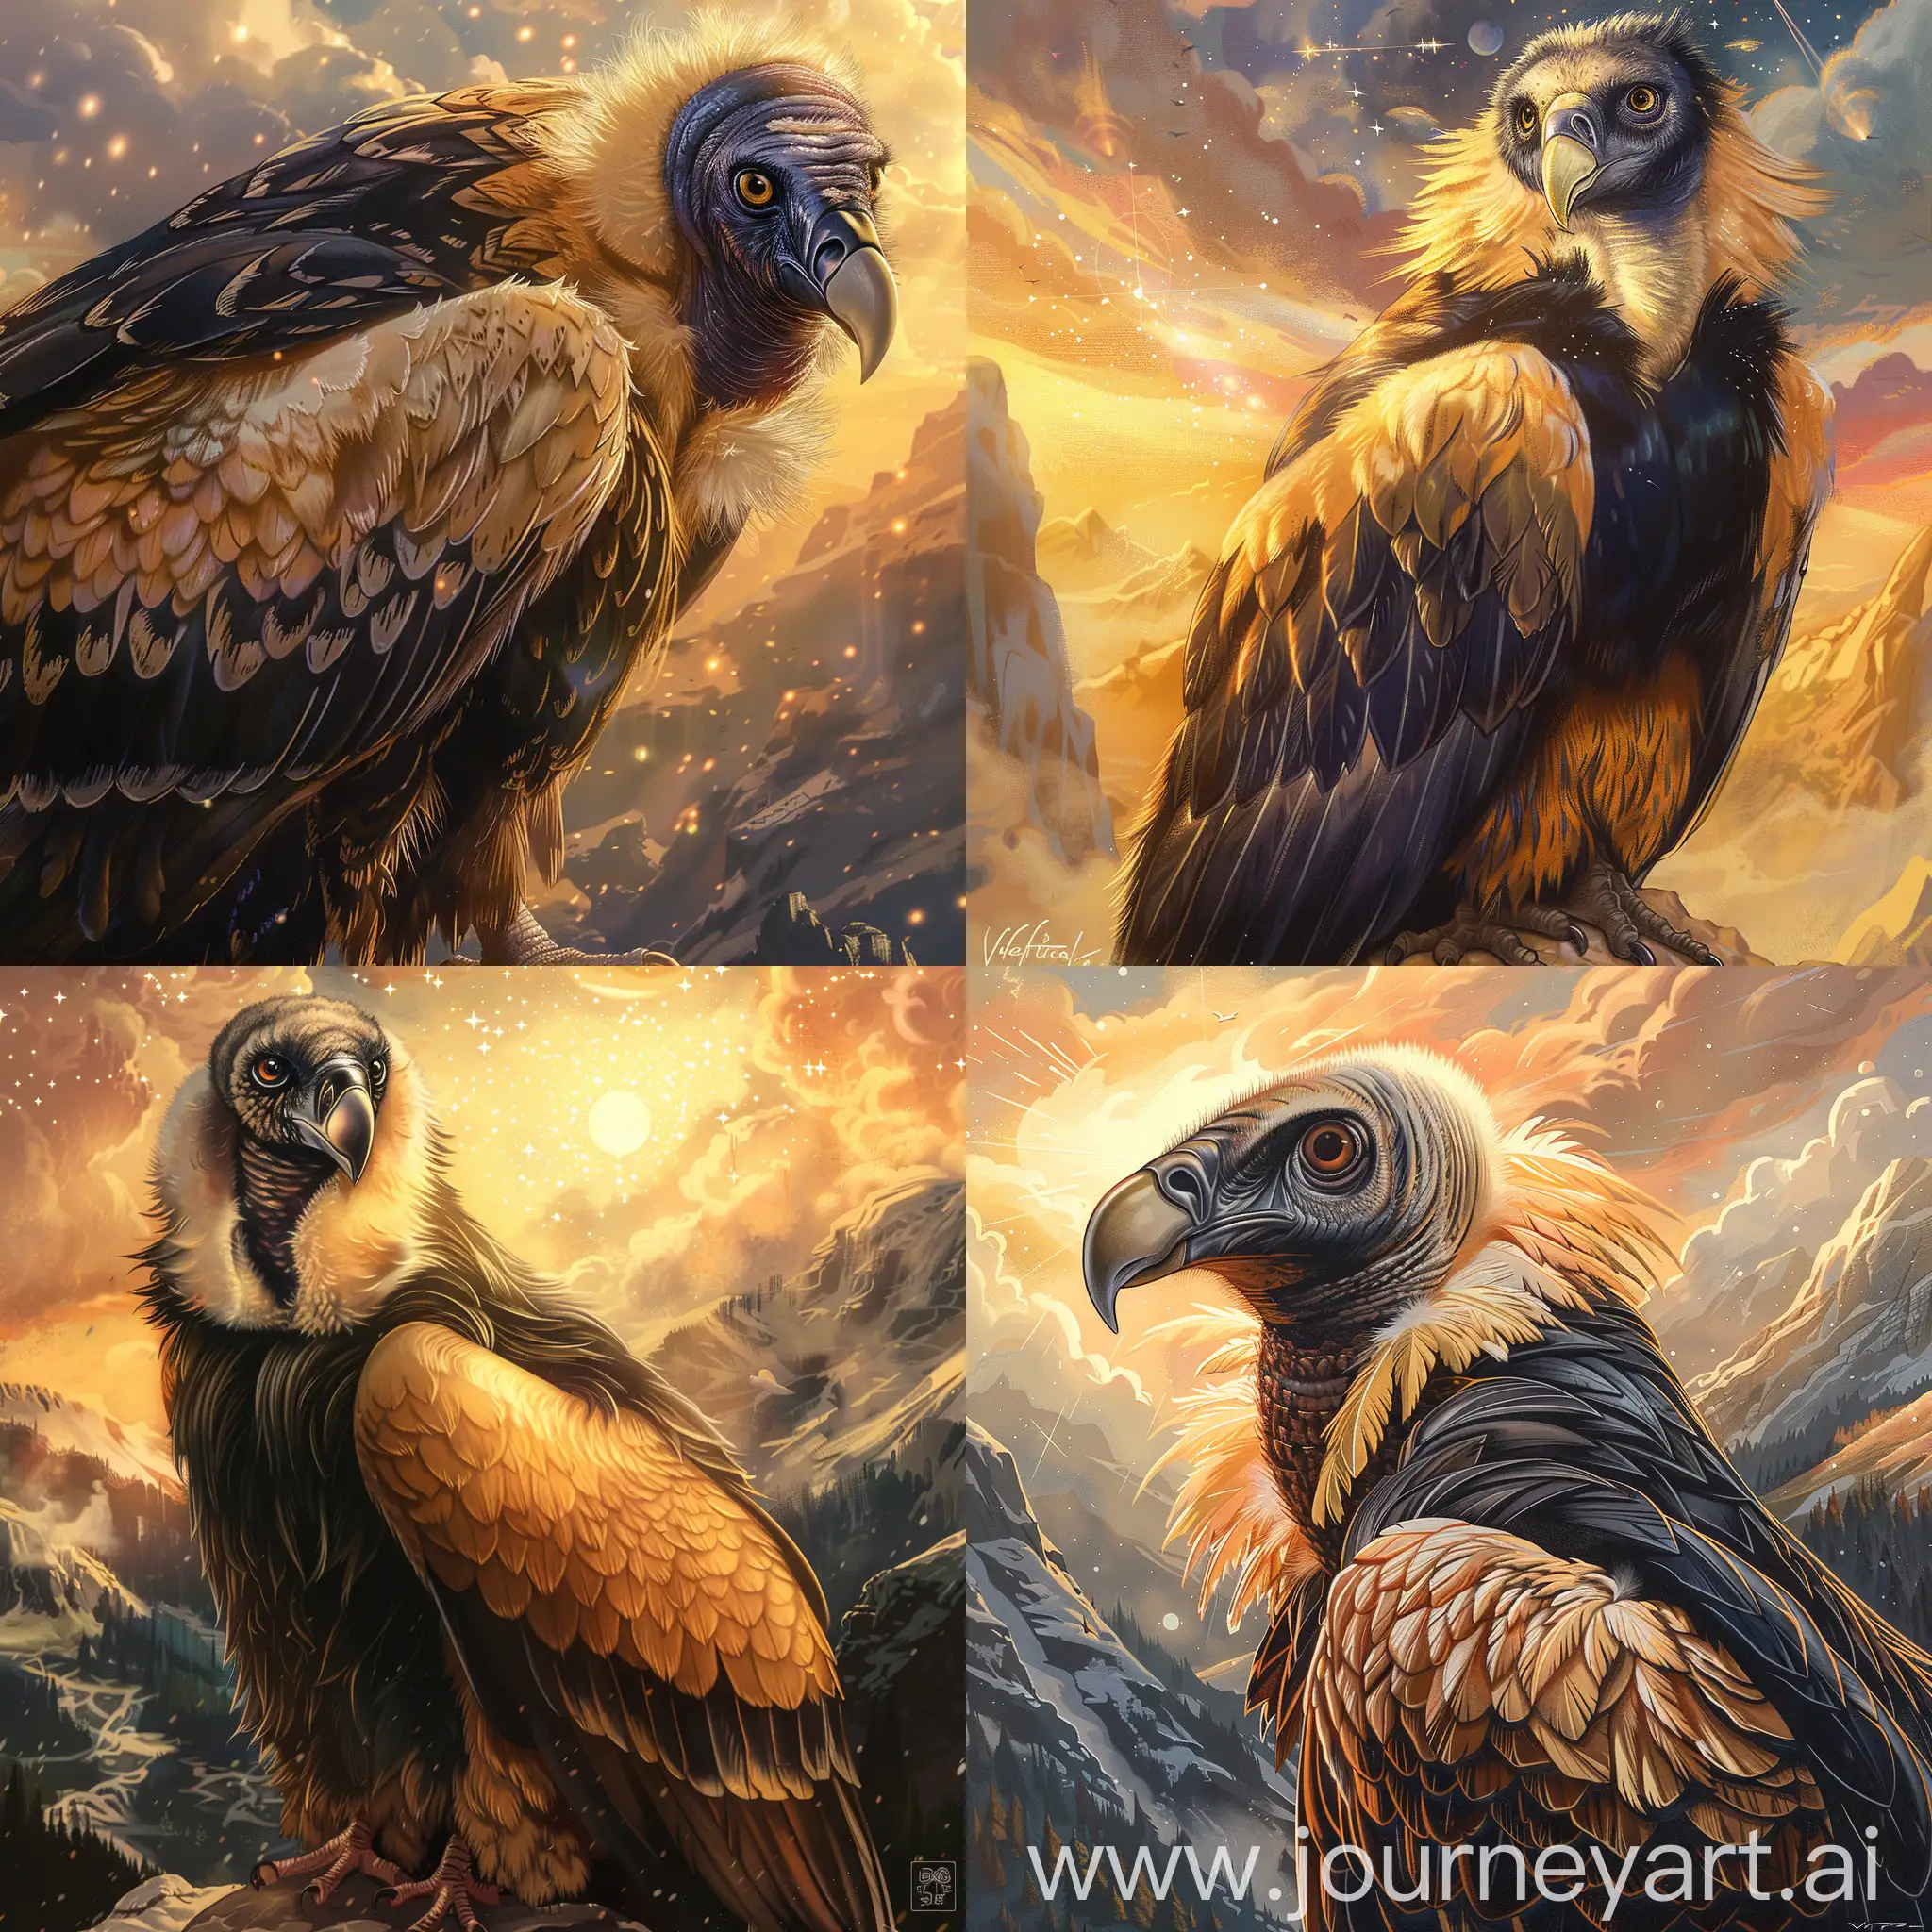  creat an extraordinary NFT featuring a bearded vulture. It emphasizes the bird's physical attributes, including its beak, eyes, plumage, and distinctive ruff of feathers. It suggests depicting the vulture in flight or perched imposingly, set against a mountainous landscape with a warm, golden-hour lighting and a celestial background. The prompt advises a realistic yet subtly fantastical artistic approach, with a focus on intricate details and dynamic composition. Finally, it highlights the emotional connotations of freedom, wisdom, and a divine connection associated with the vulture.